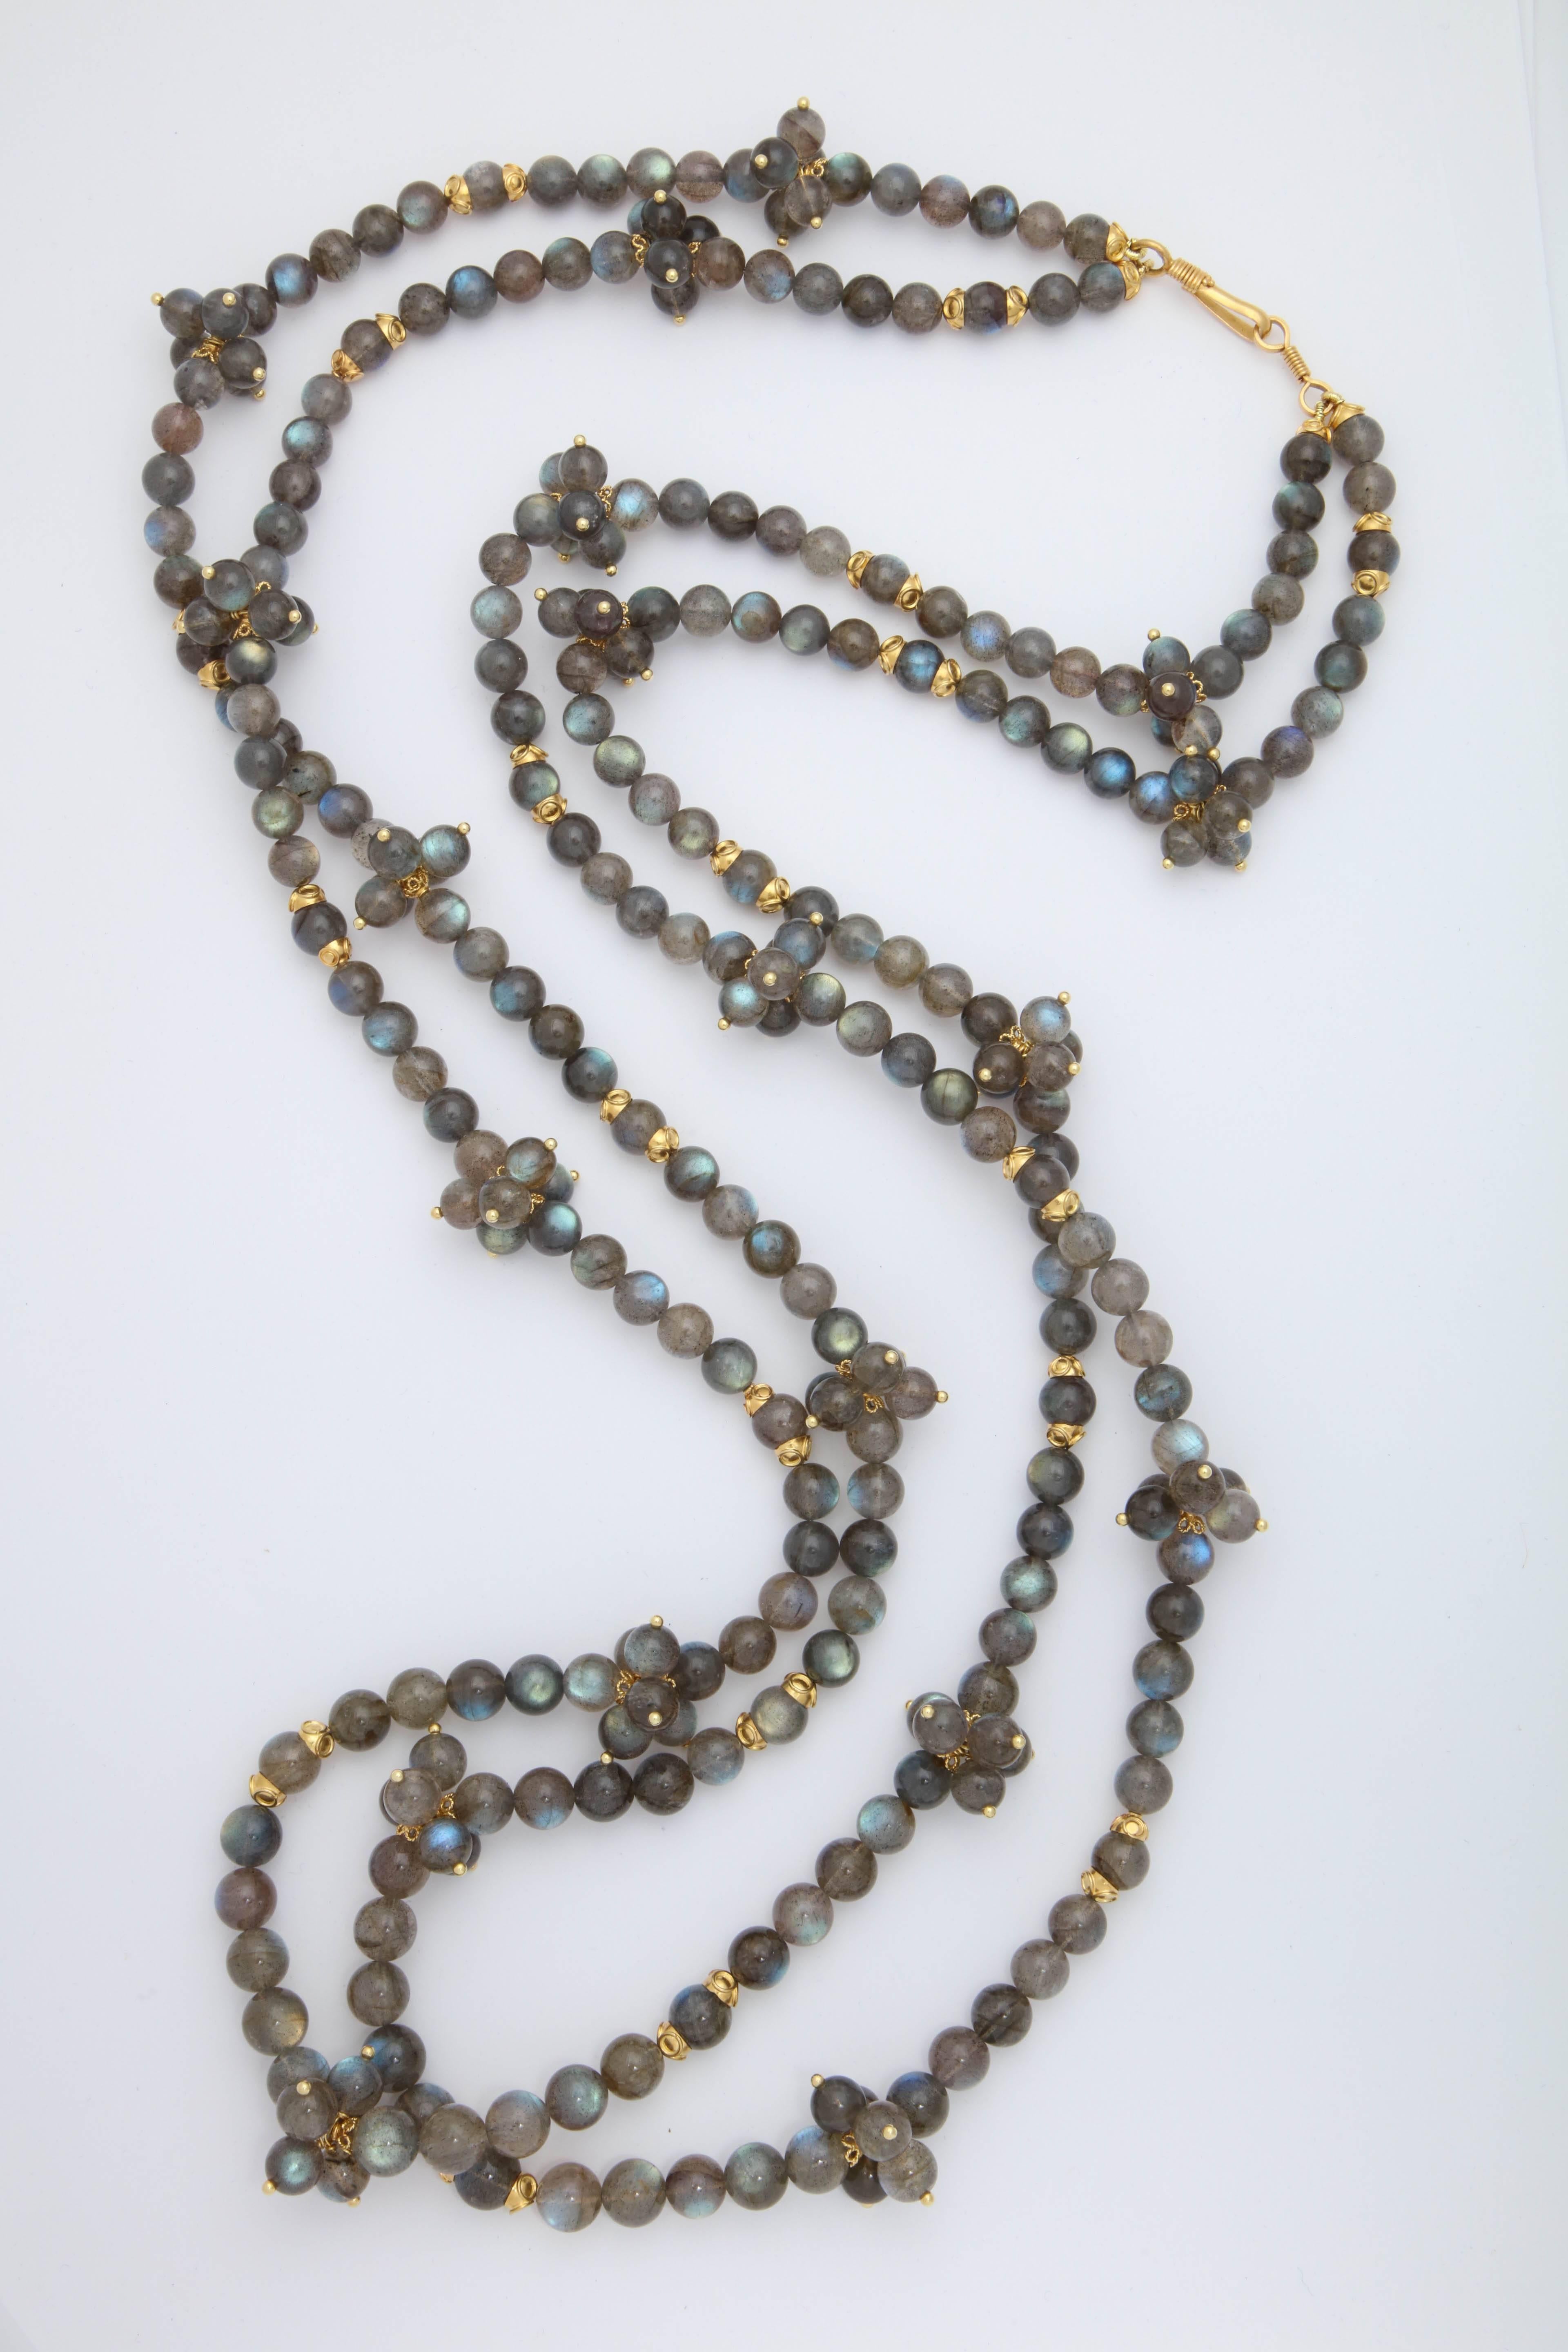 A two strand nestled necklace composed of round polished labradorite beads, 18kt yellow gold caps and headpins. The necklace has sections of labradorite beads separated by clusters of labradorite beads and gold caps.
Length: 44.00 inches